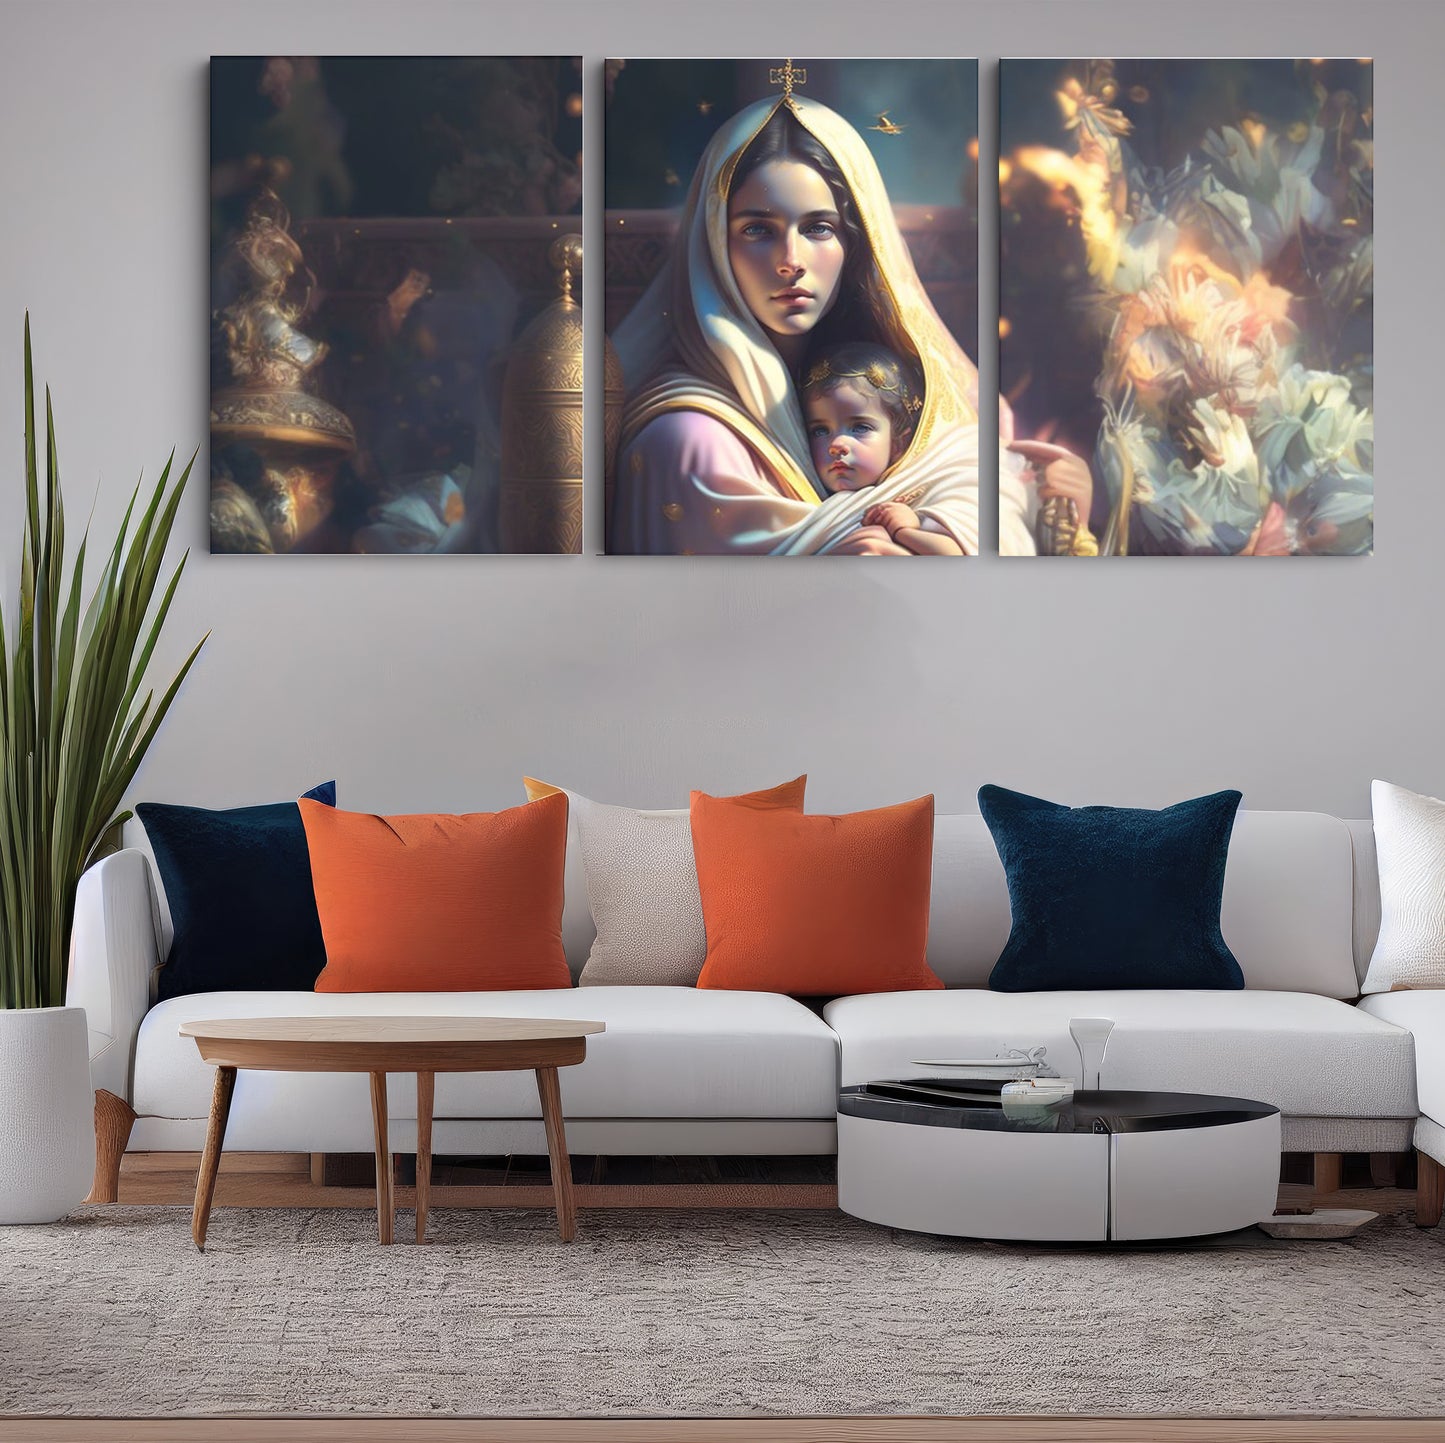 Sacred Serenity: Saint Mary Concept Art - Inspiring Wall Art Celebrating the Grace and Devotion of Saint Mary in a Conceptual Representation - S06E01